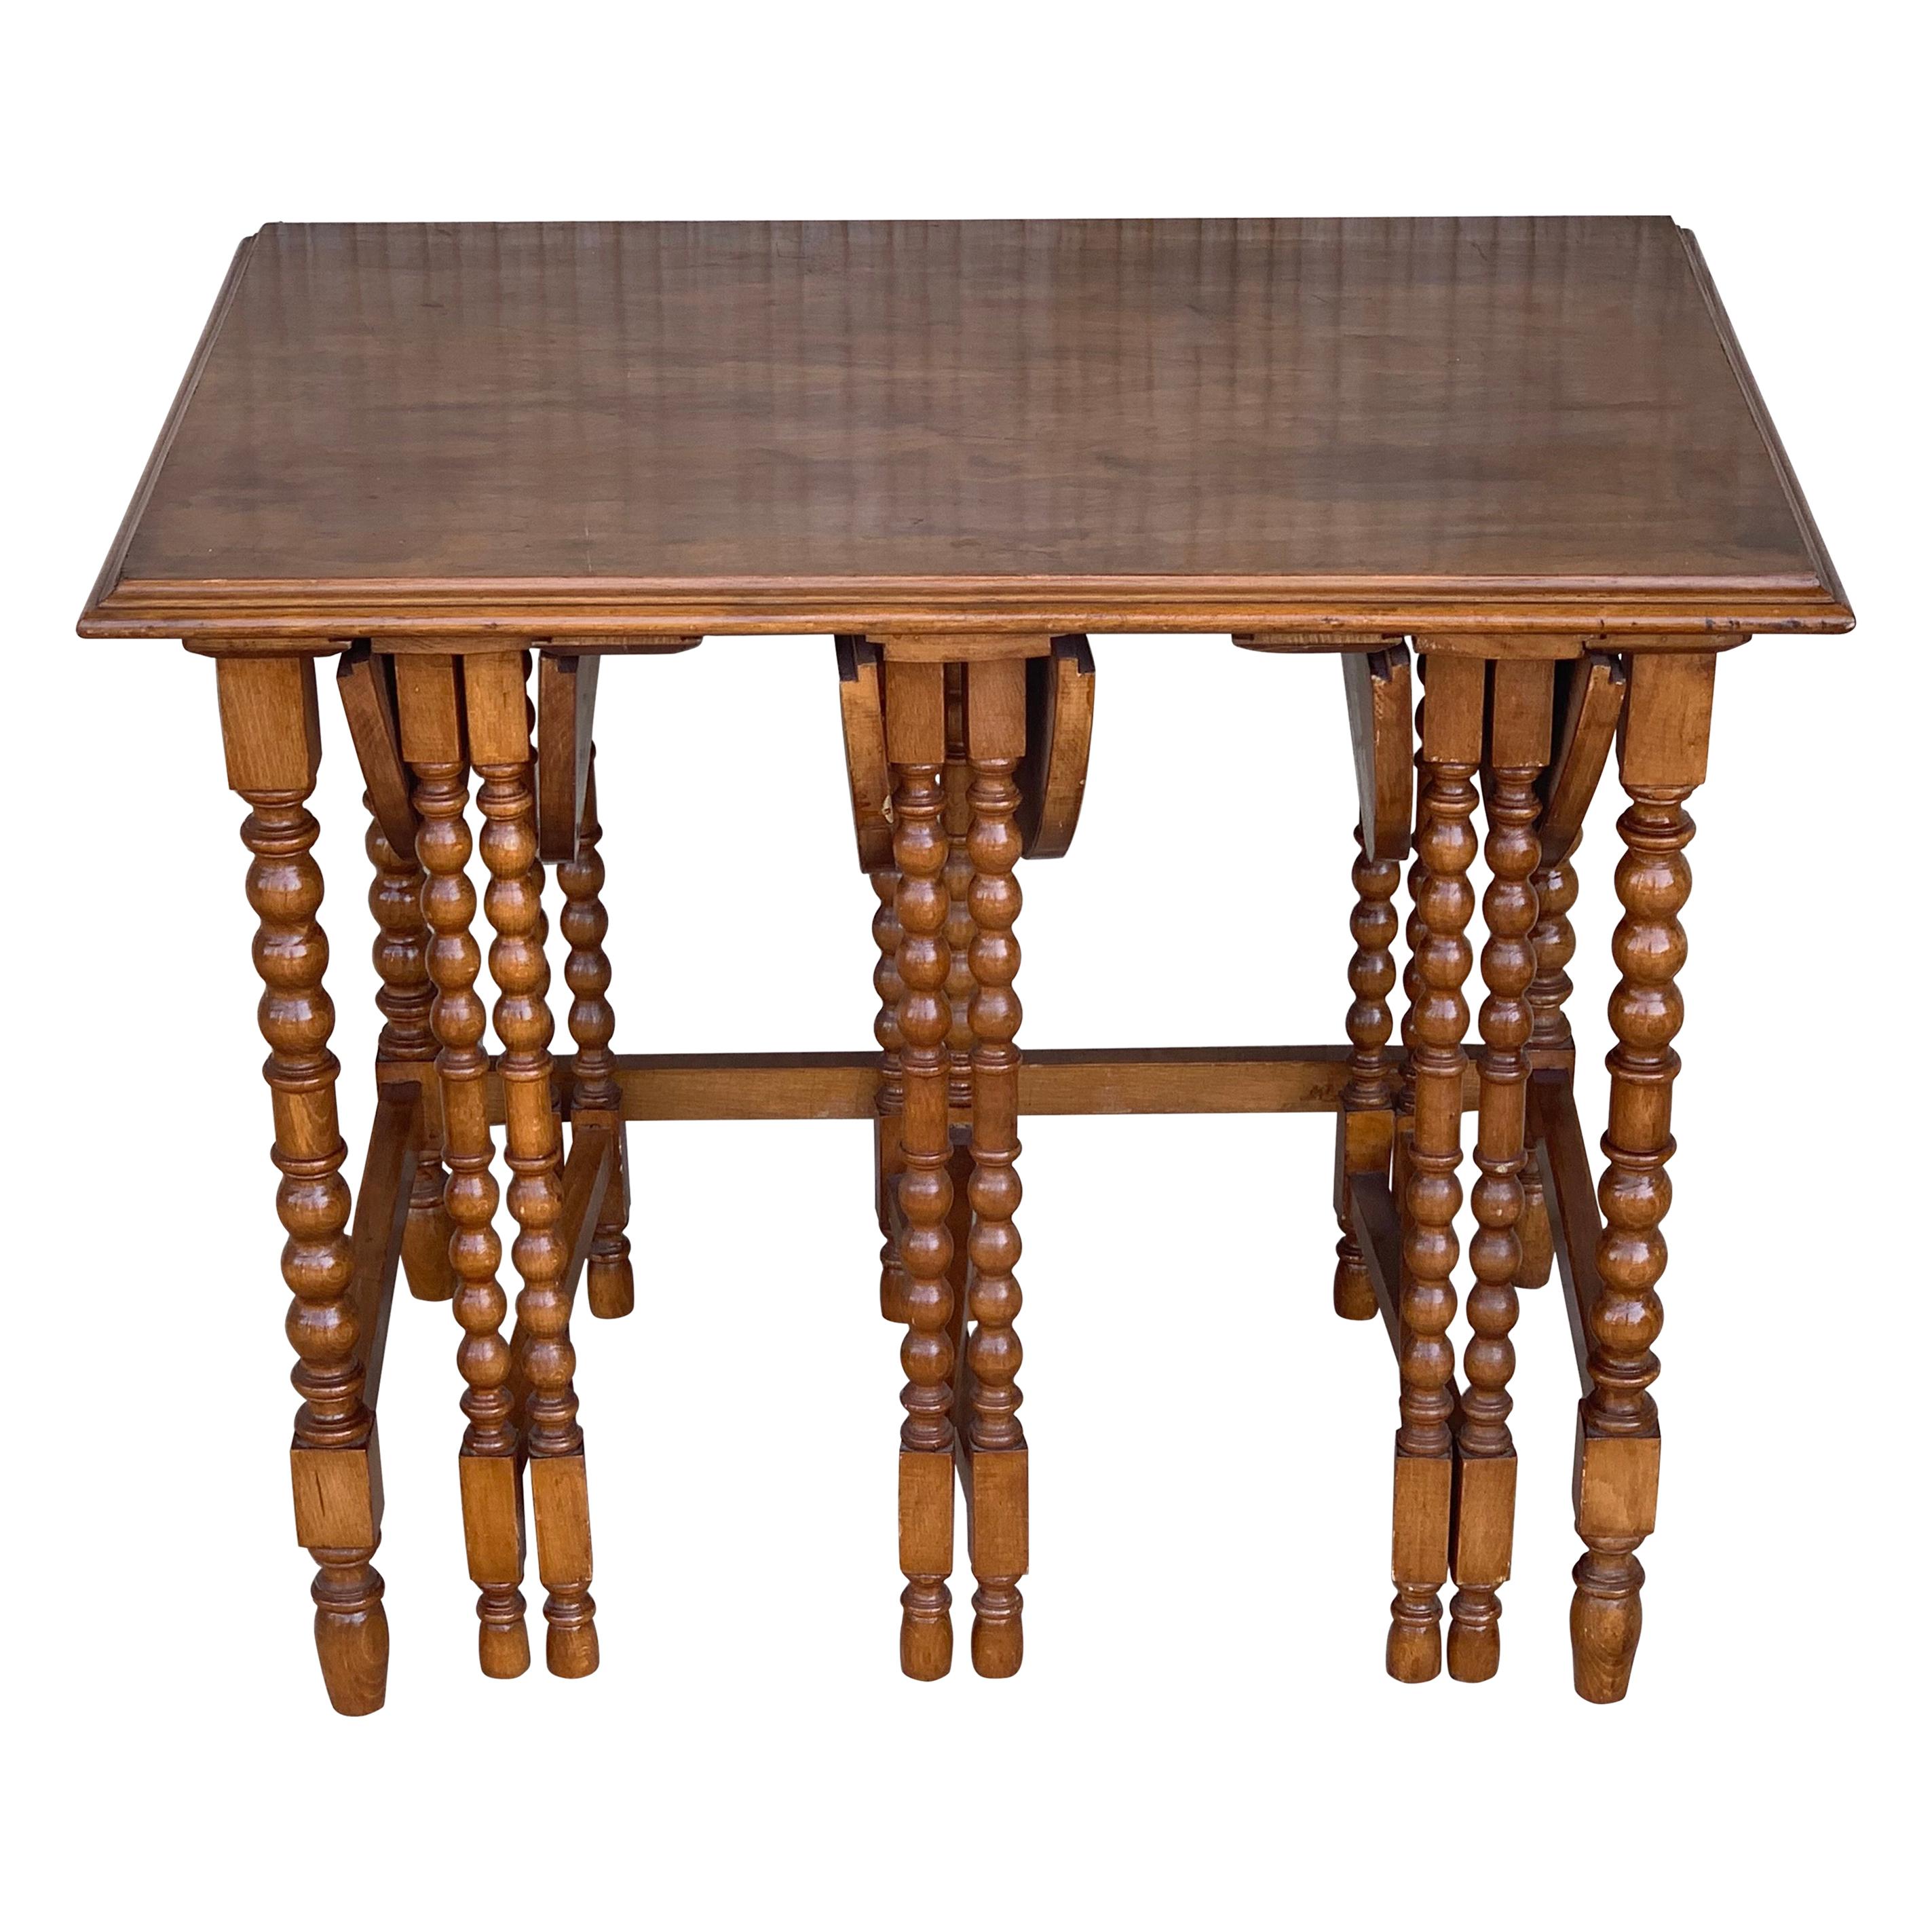 20th Spanish Walnut Nesting and Folding Tables with Turned Legs